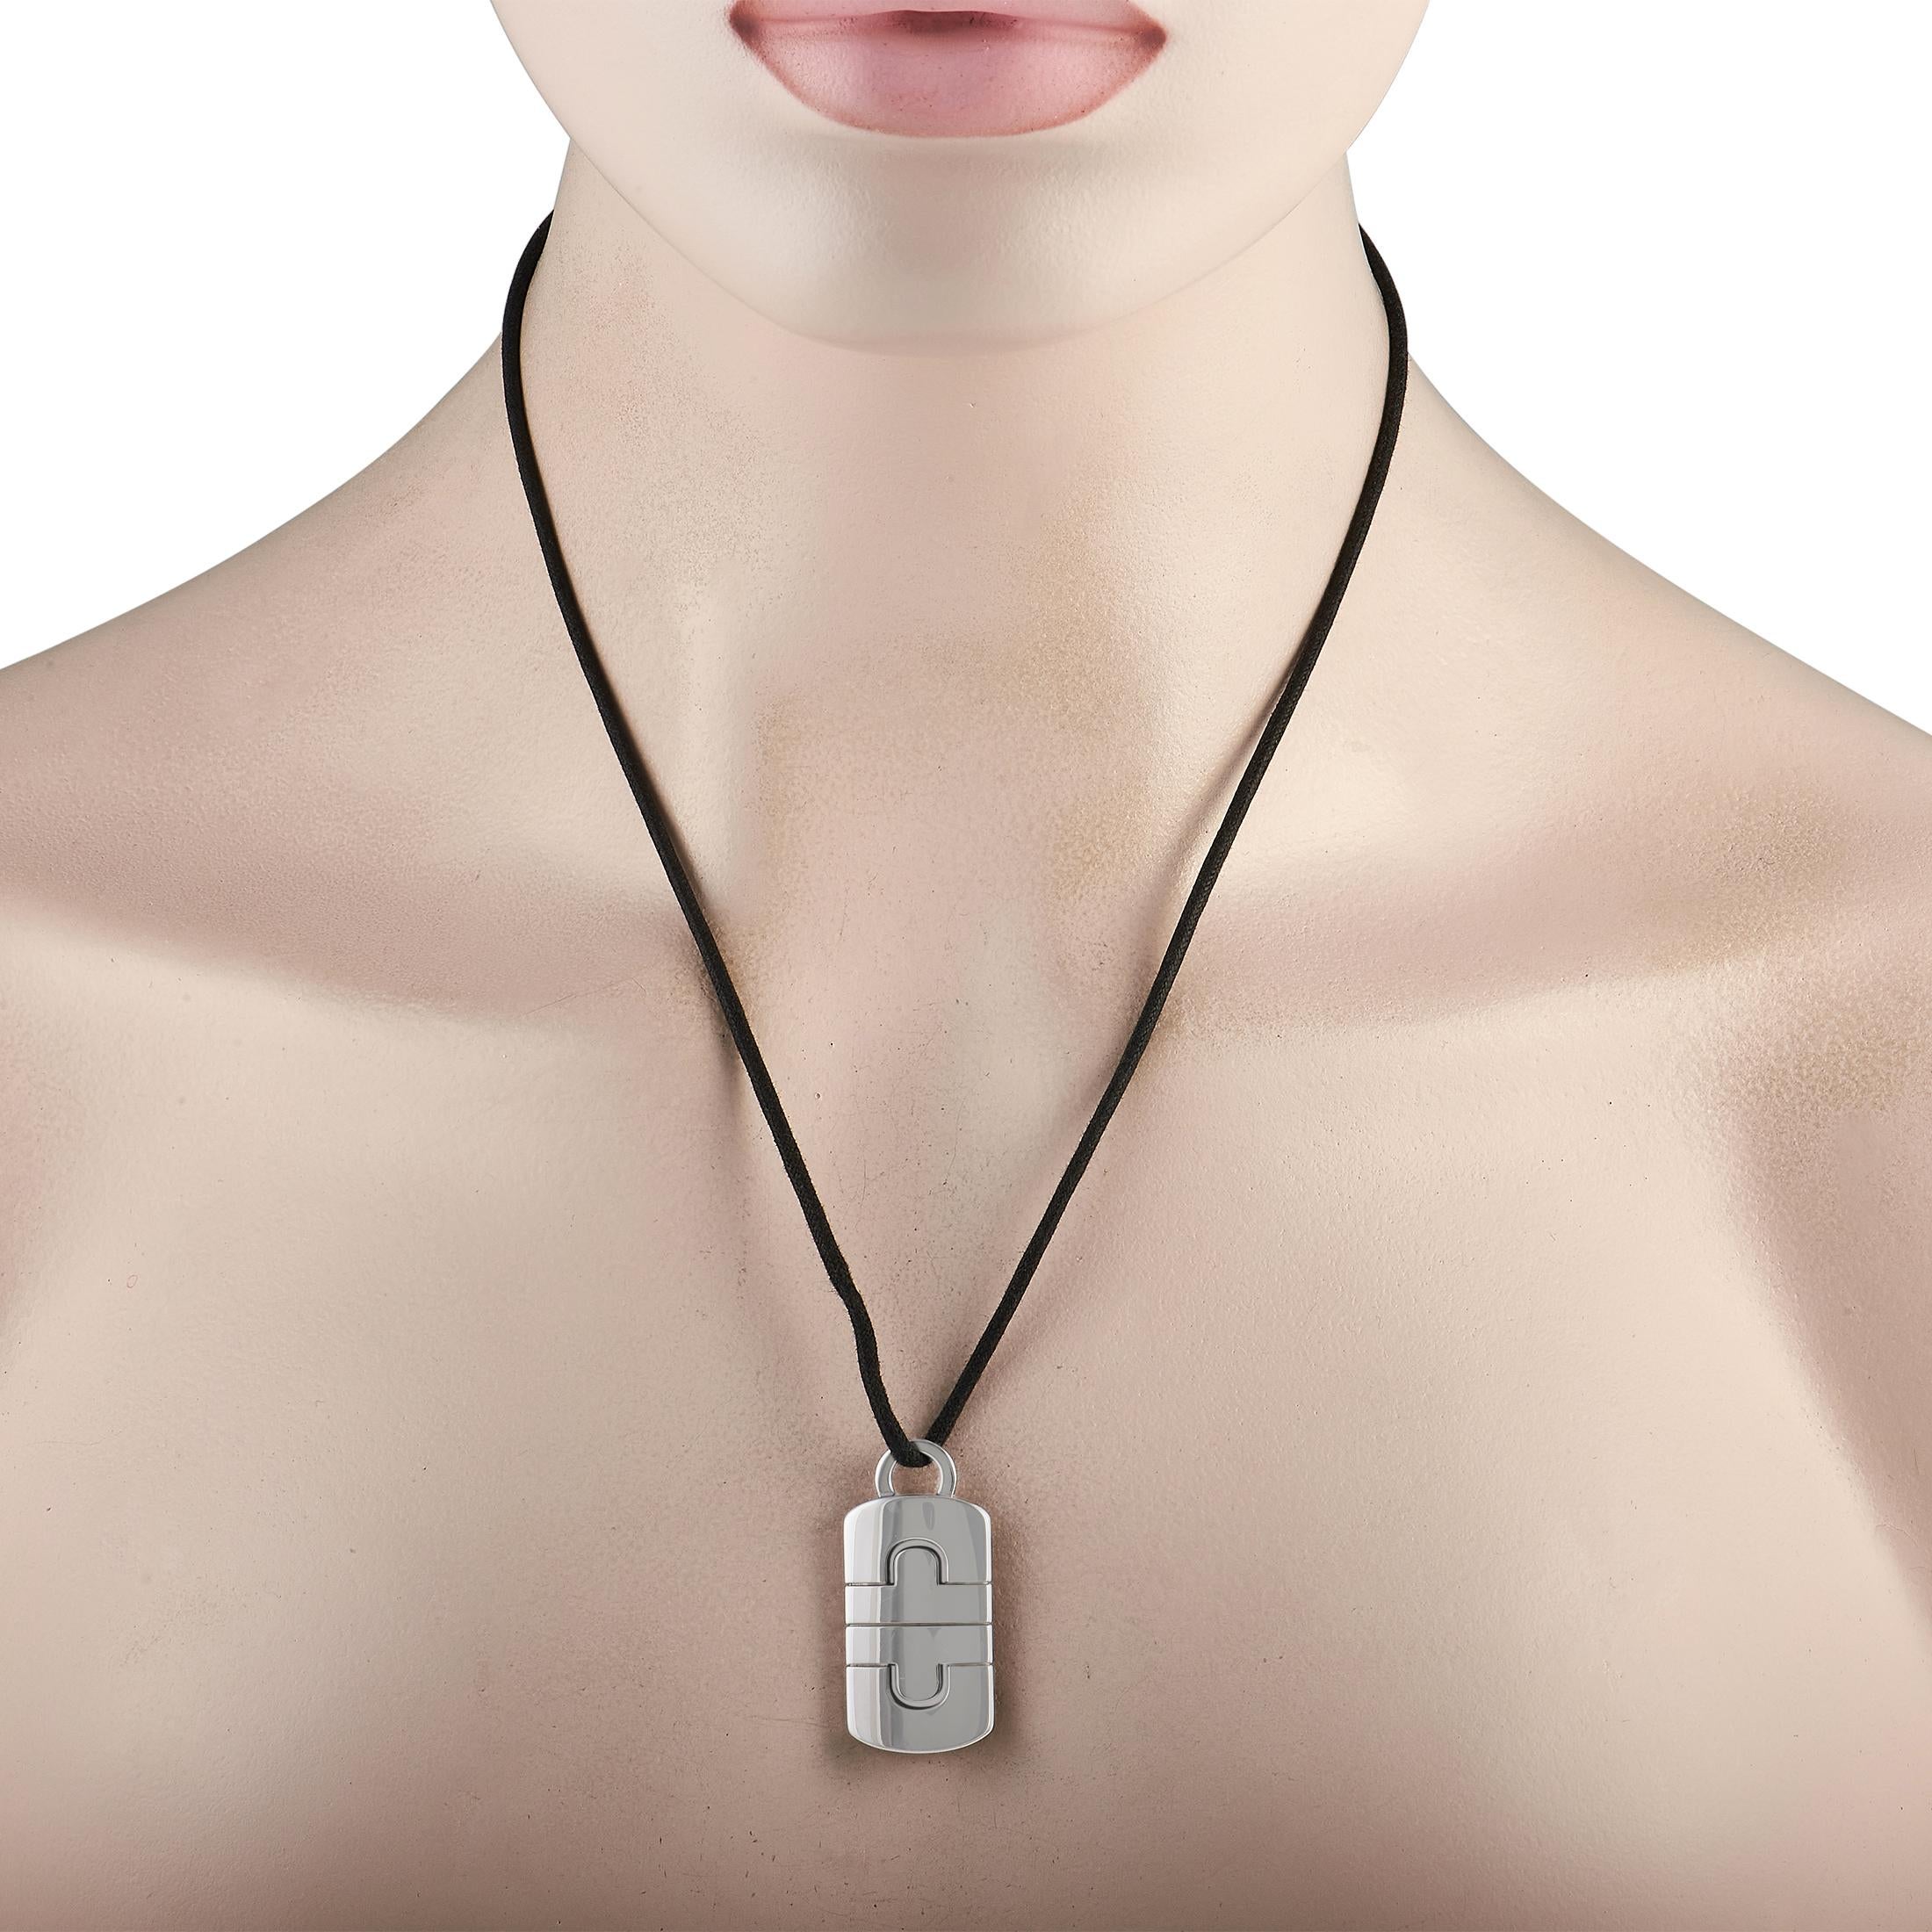 From the Parentesi Collection, this Bvlgari necklace features a 1.5